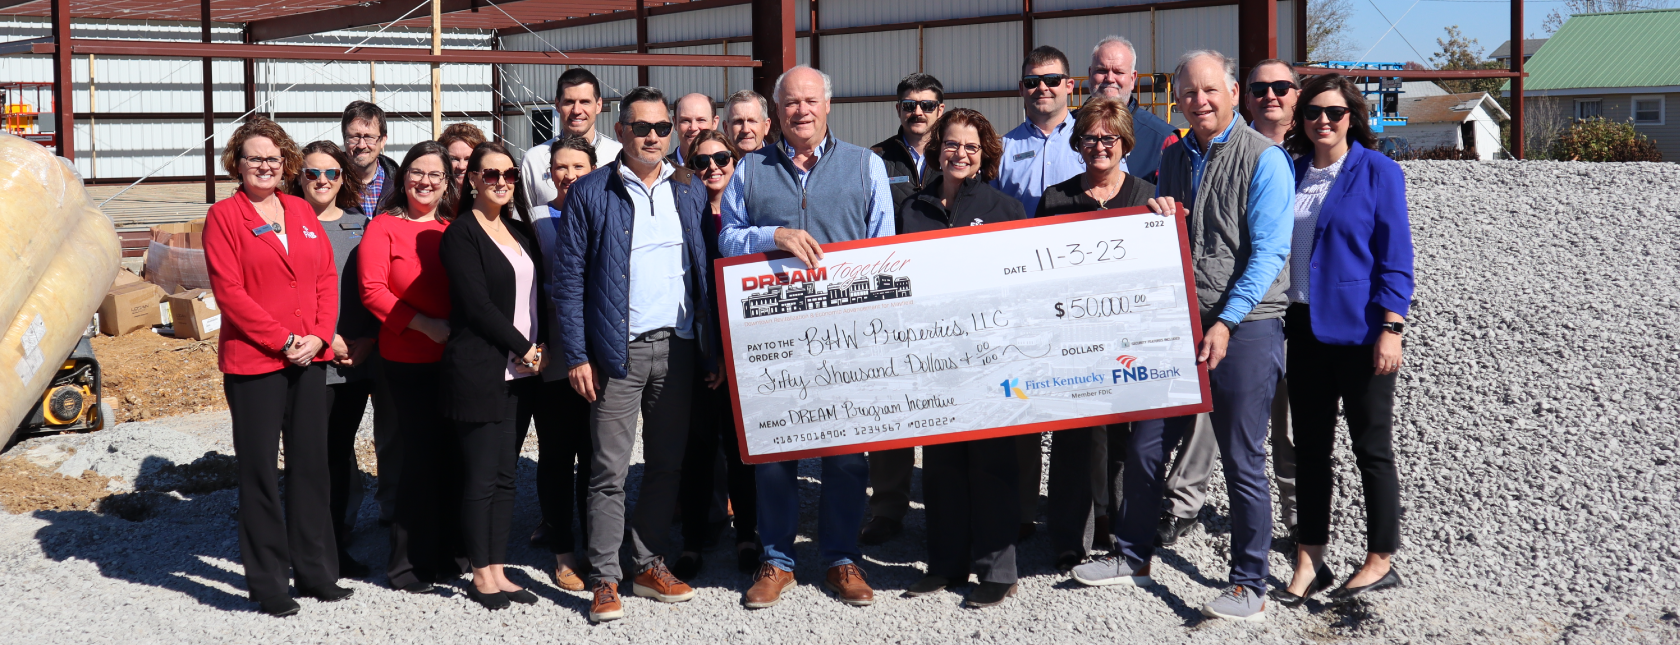 DREAM TOGETHER CHECK PRESENTATION HELD FOR BHW PROPERTIES, LLC